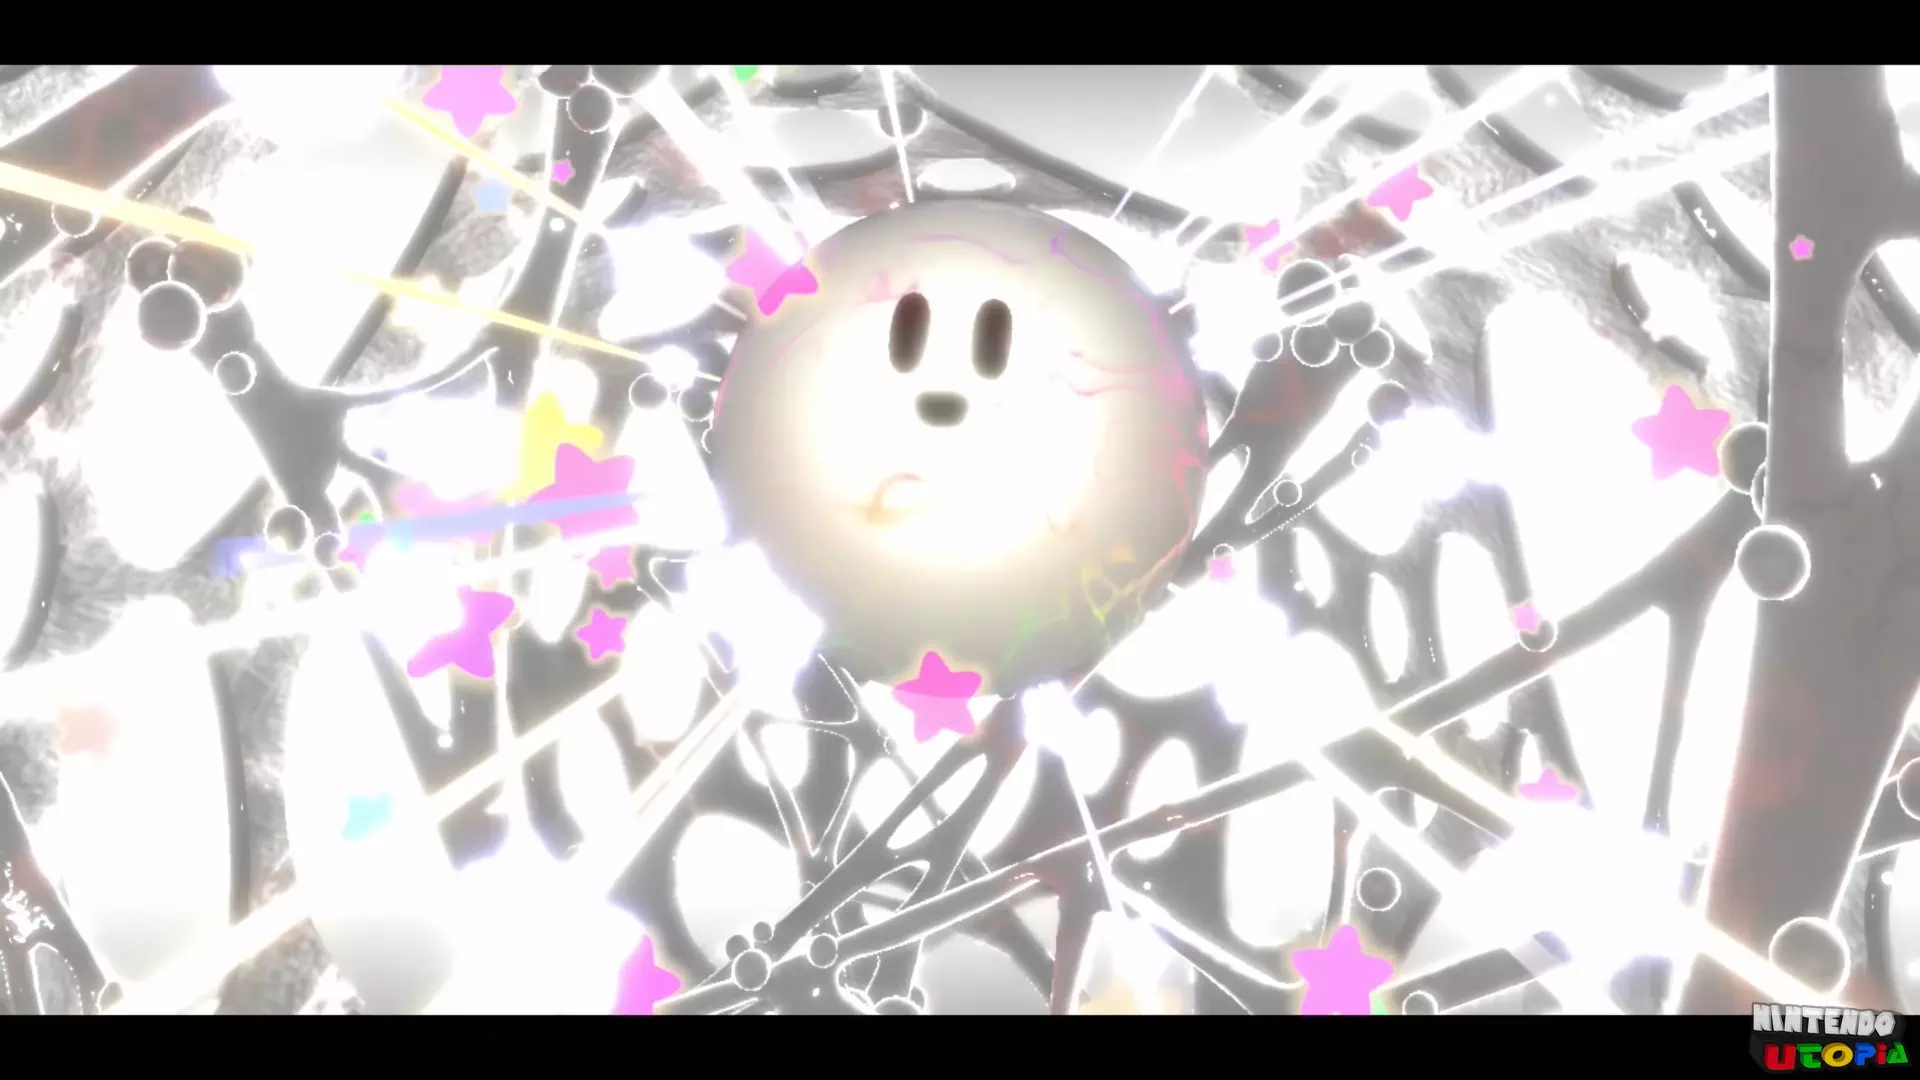 Void smiles like Kirby while emitting stars and light.